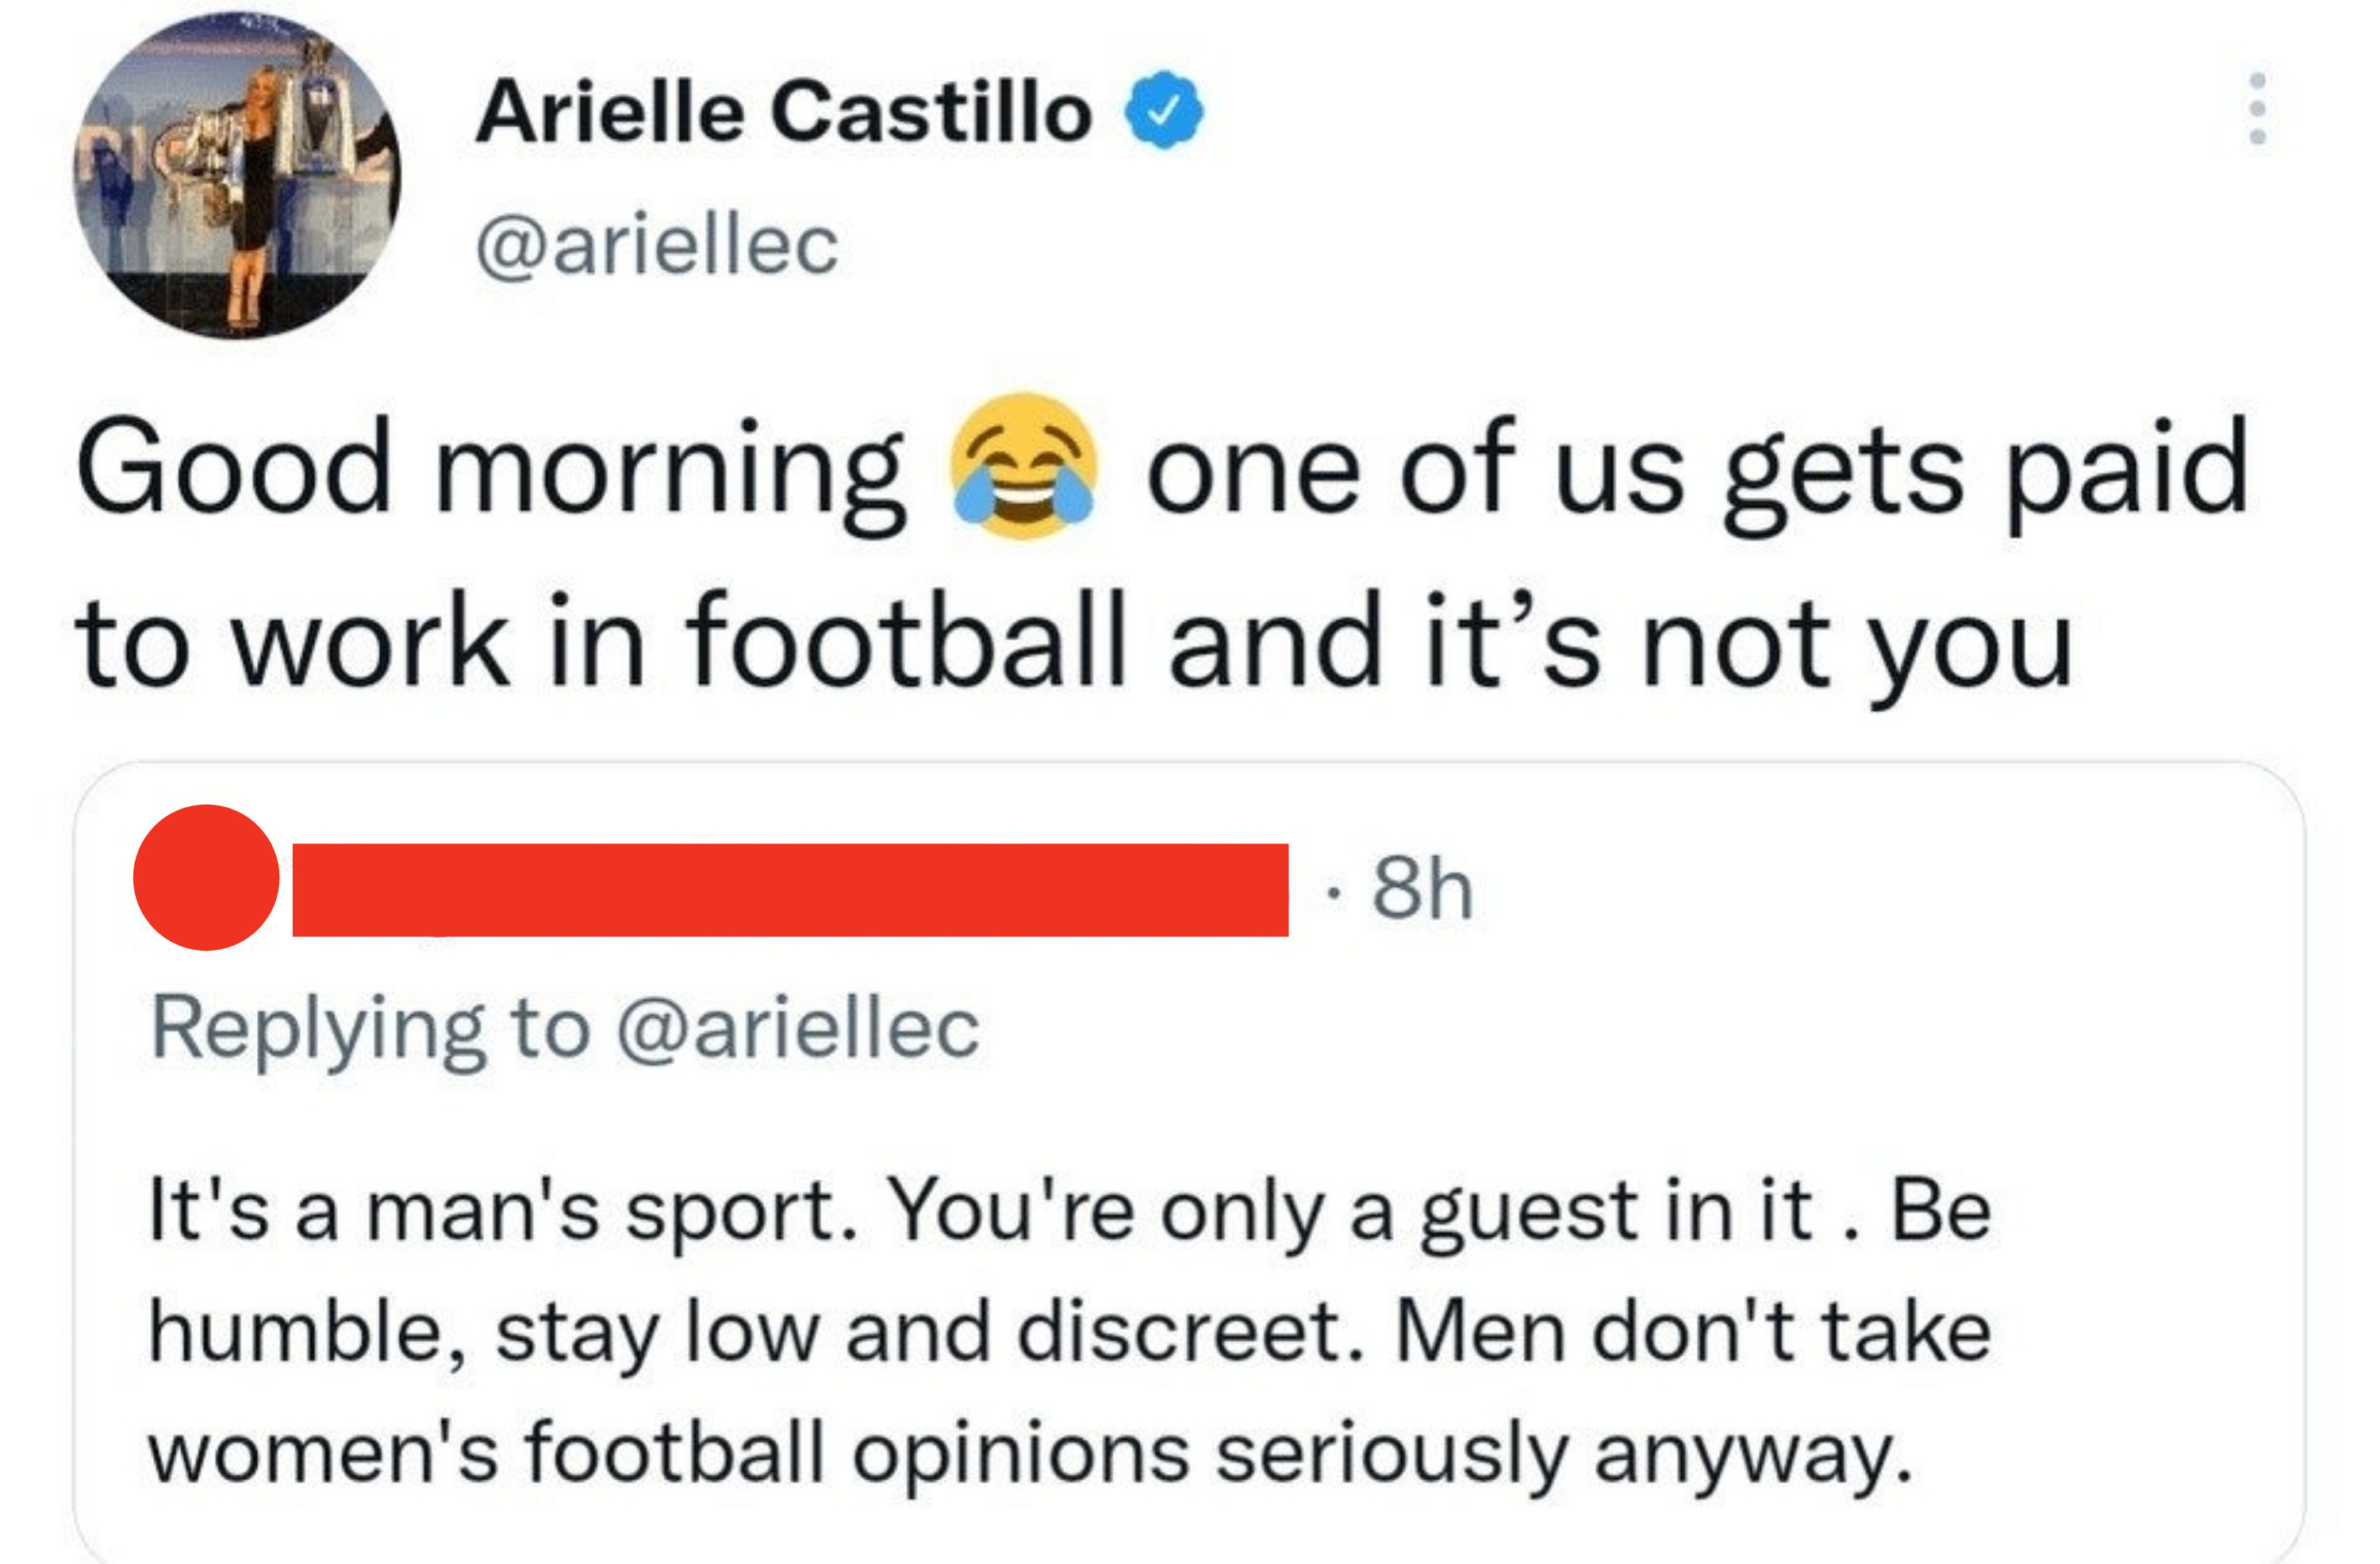 &quot;Good morning one of us gets paid to workin football and it&#x27;s not you&quot;